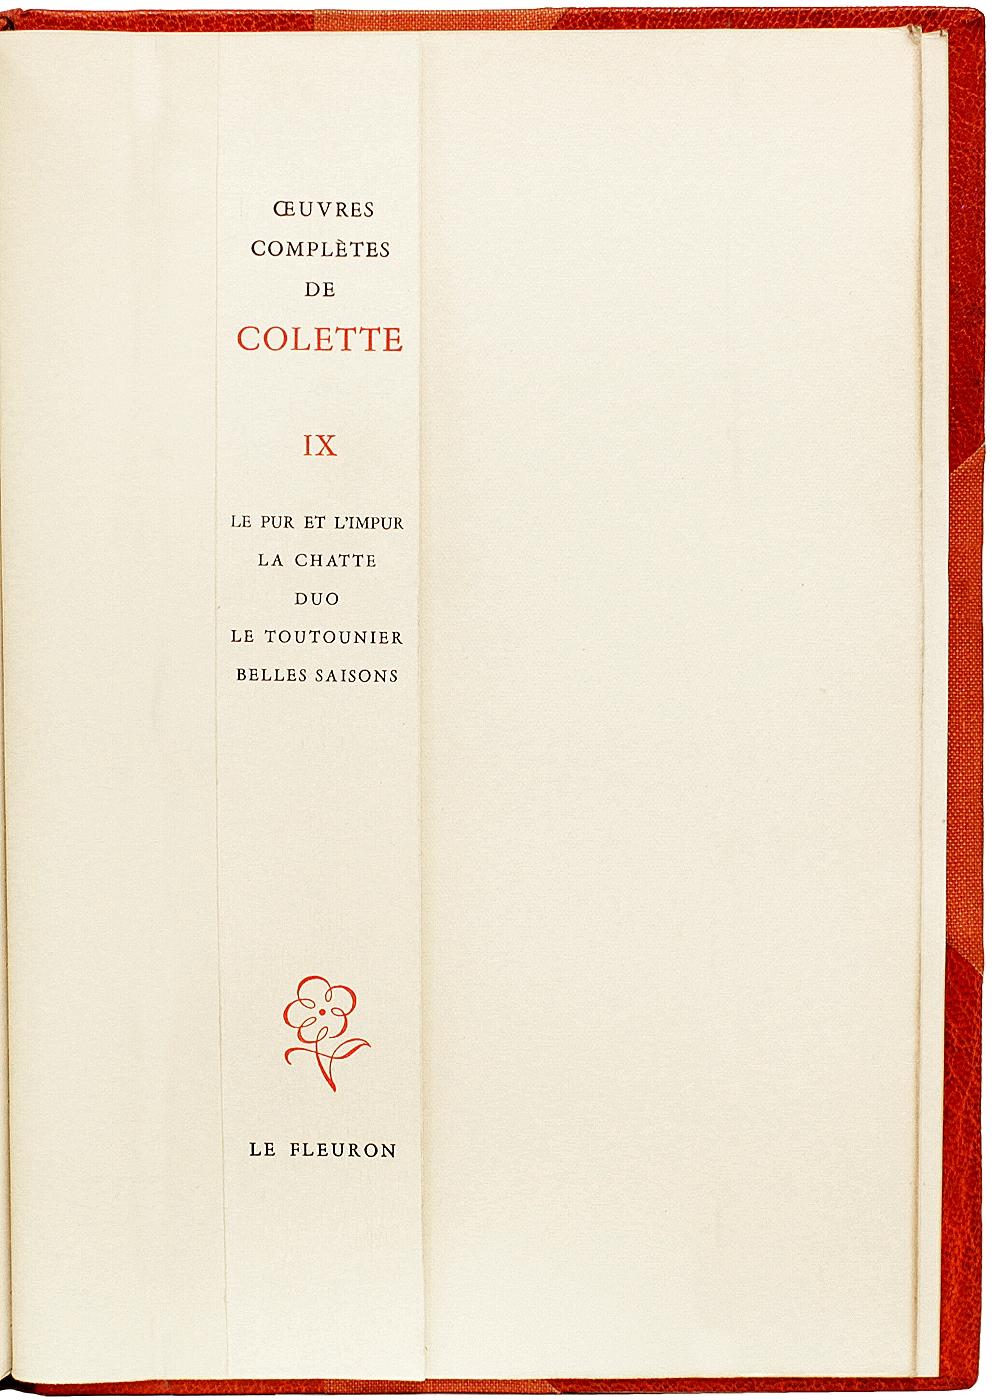 Leather Oeuvres Completes De Colette. Complete Works of Colette - FIRST COLLECTED EDITON For Sale